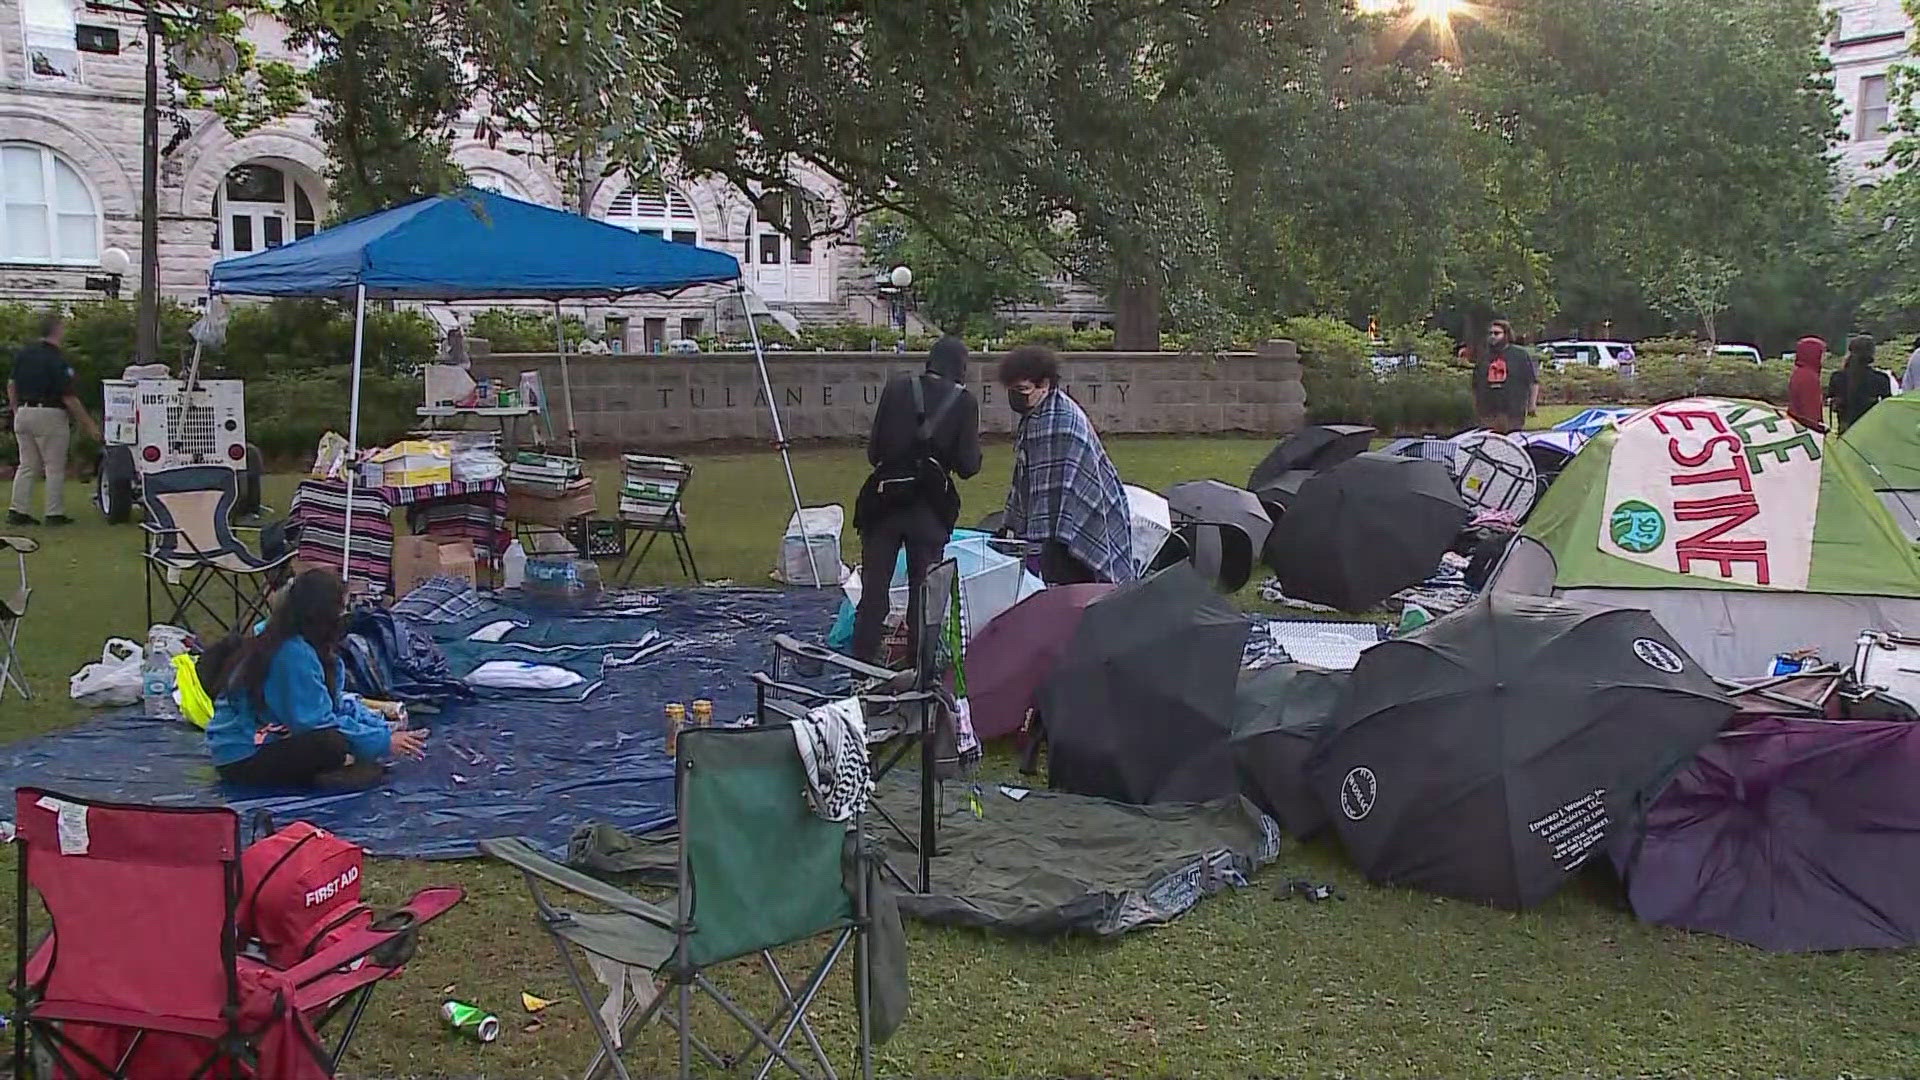 Student protesters set up an encampment on Tulane University campus. The university has issued suspensions, moved classes to online.